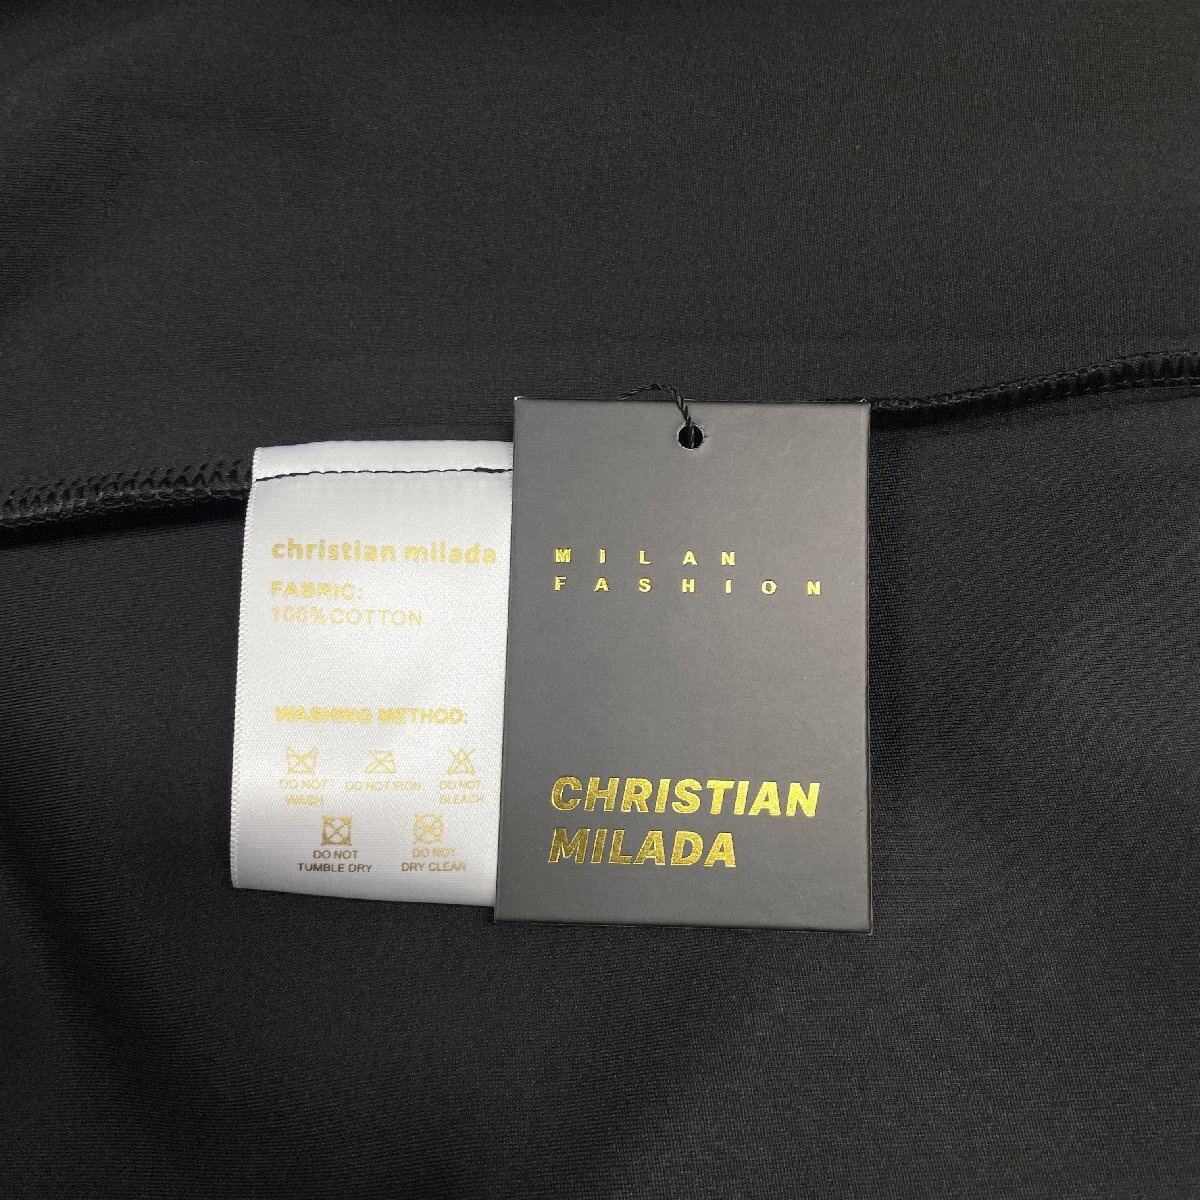  regular price 4 ten thousand *christian milada* milano departure * tray na* cotton 100% soft ventilation comfortable piece . stylish easy man and woman use everyday M/46 size 